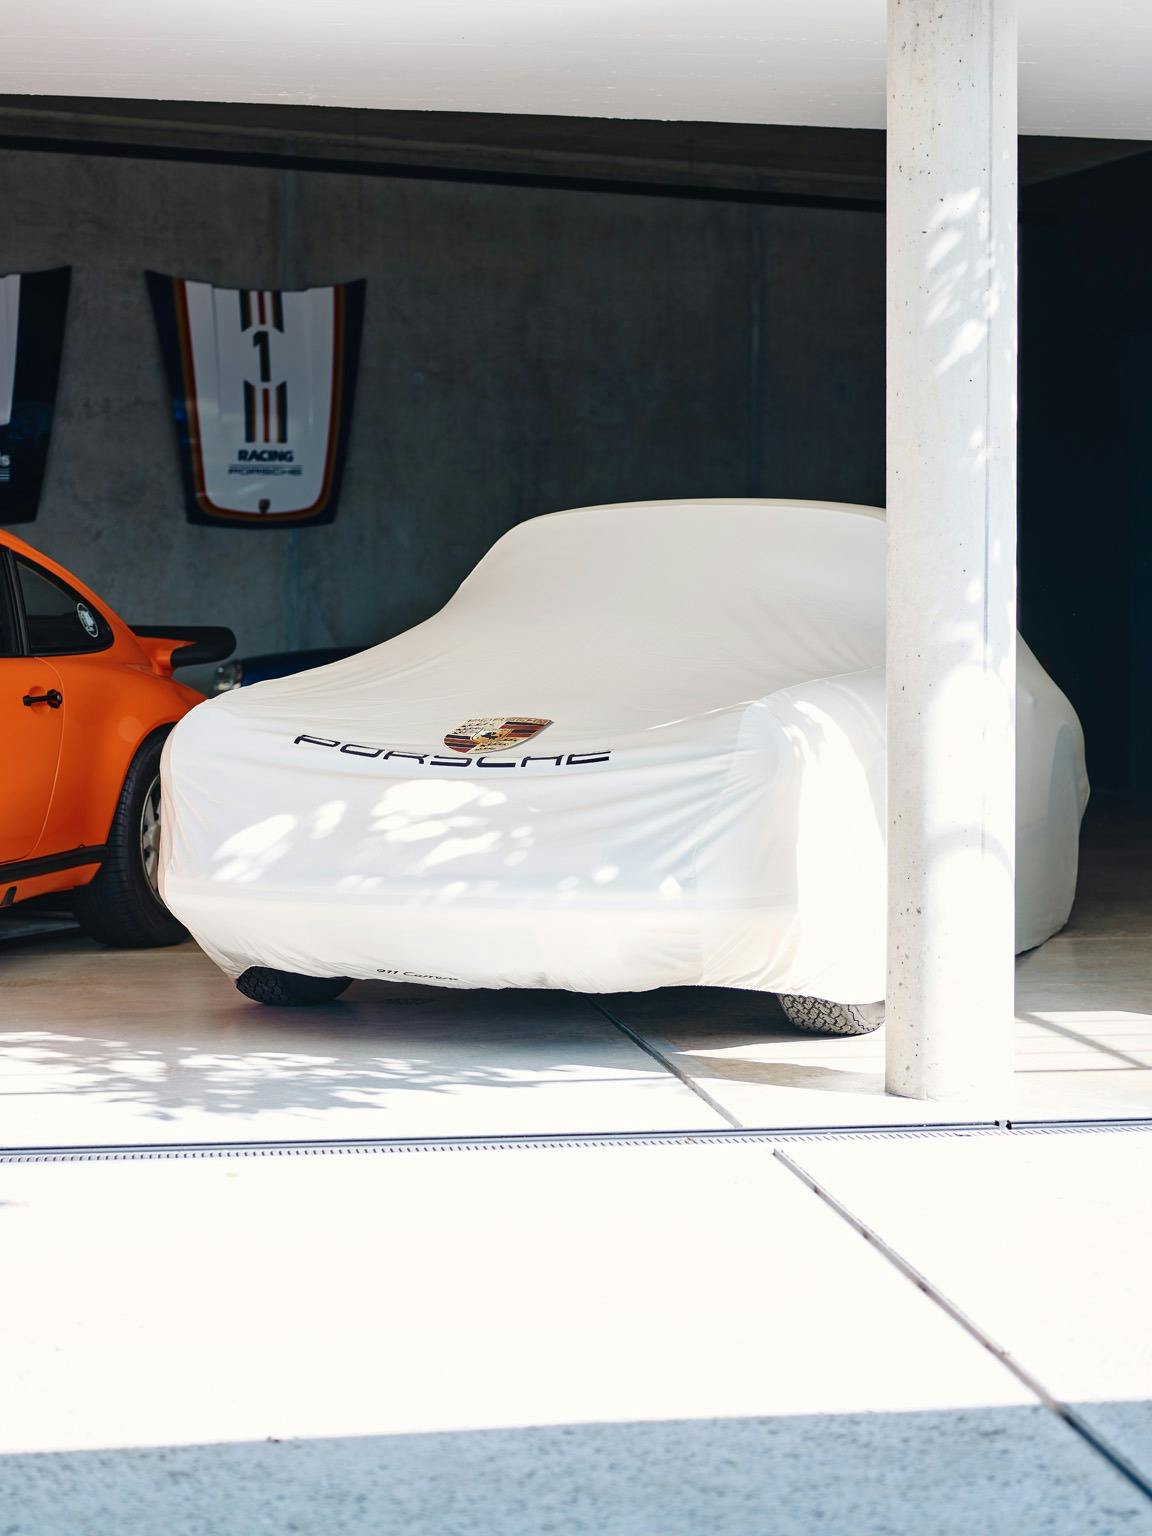 One 911 with a Car cover and one Panamera without Car Cover in a big garage